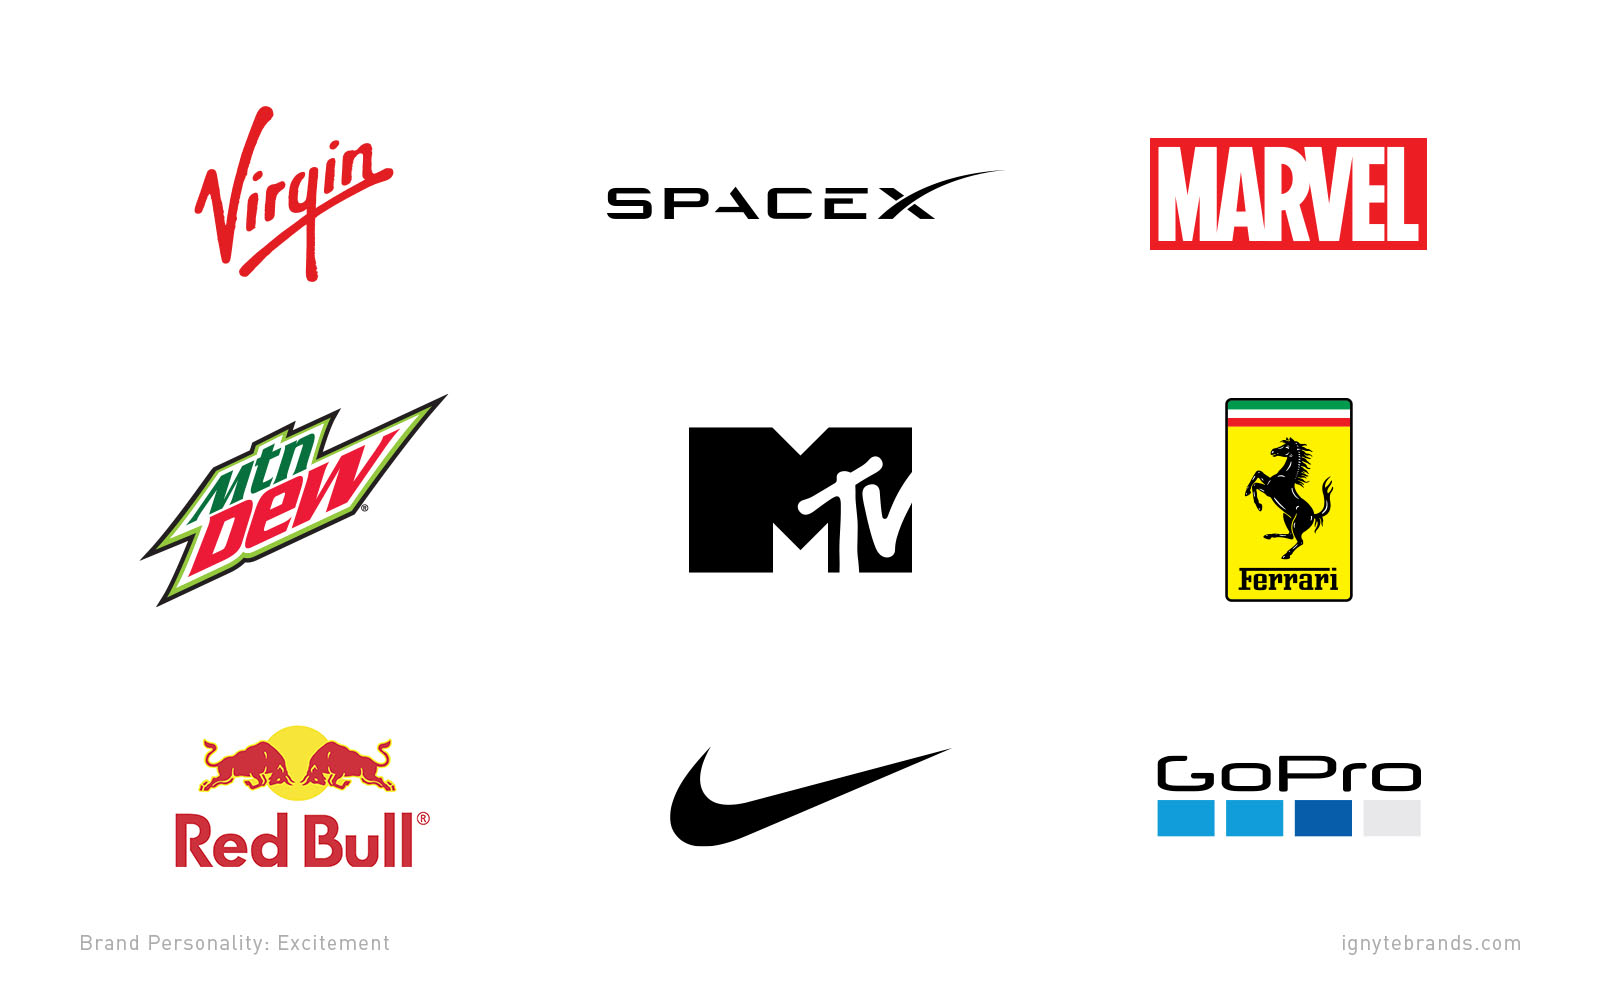 9 logos of brands with exciting brand personalities, including Virgin, SpaceX, Marvel, Mountain Dew, MTV, Ferrari, Red Bull, Nike, and GoPro